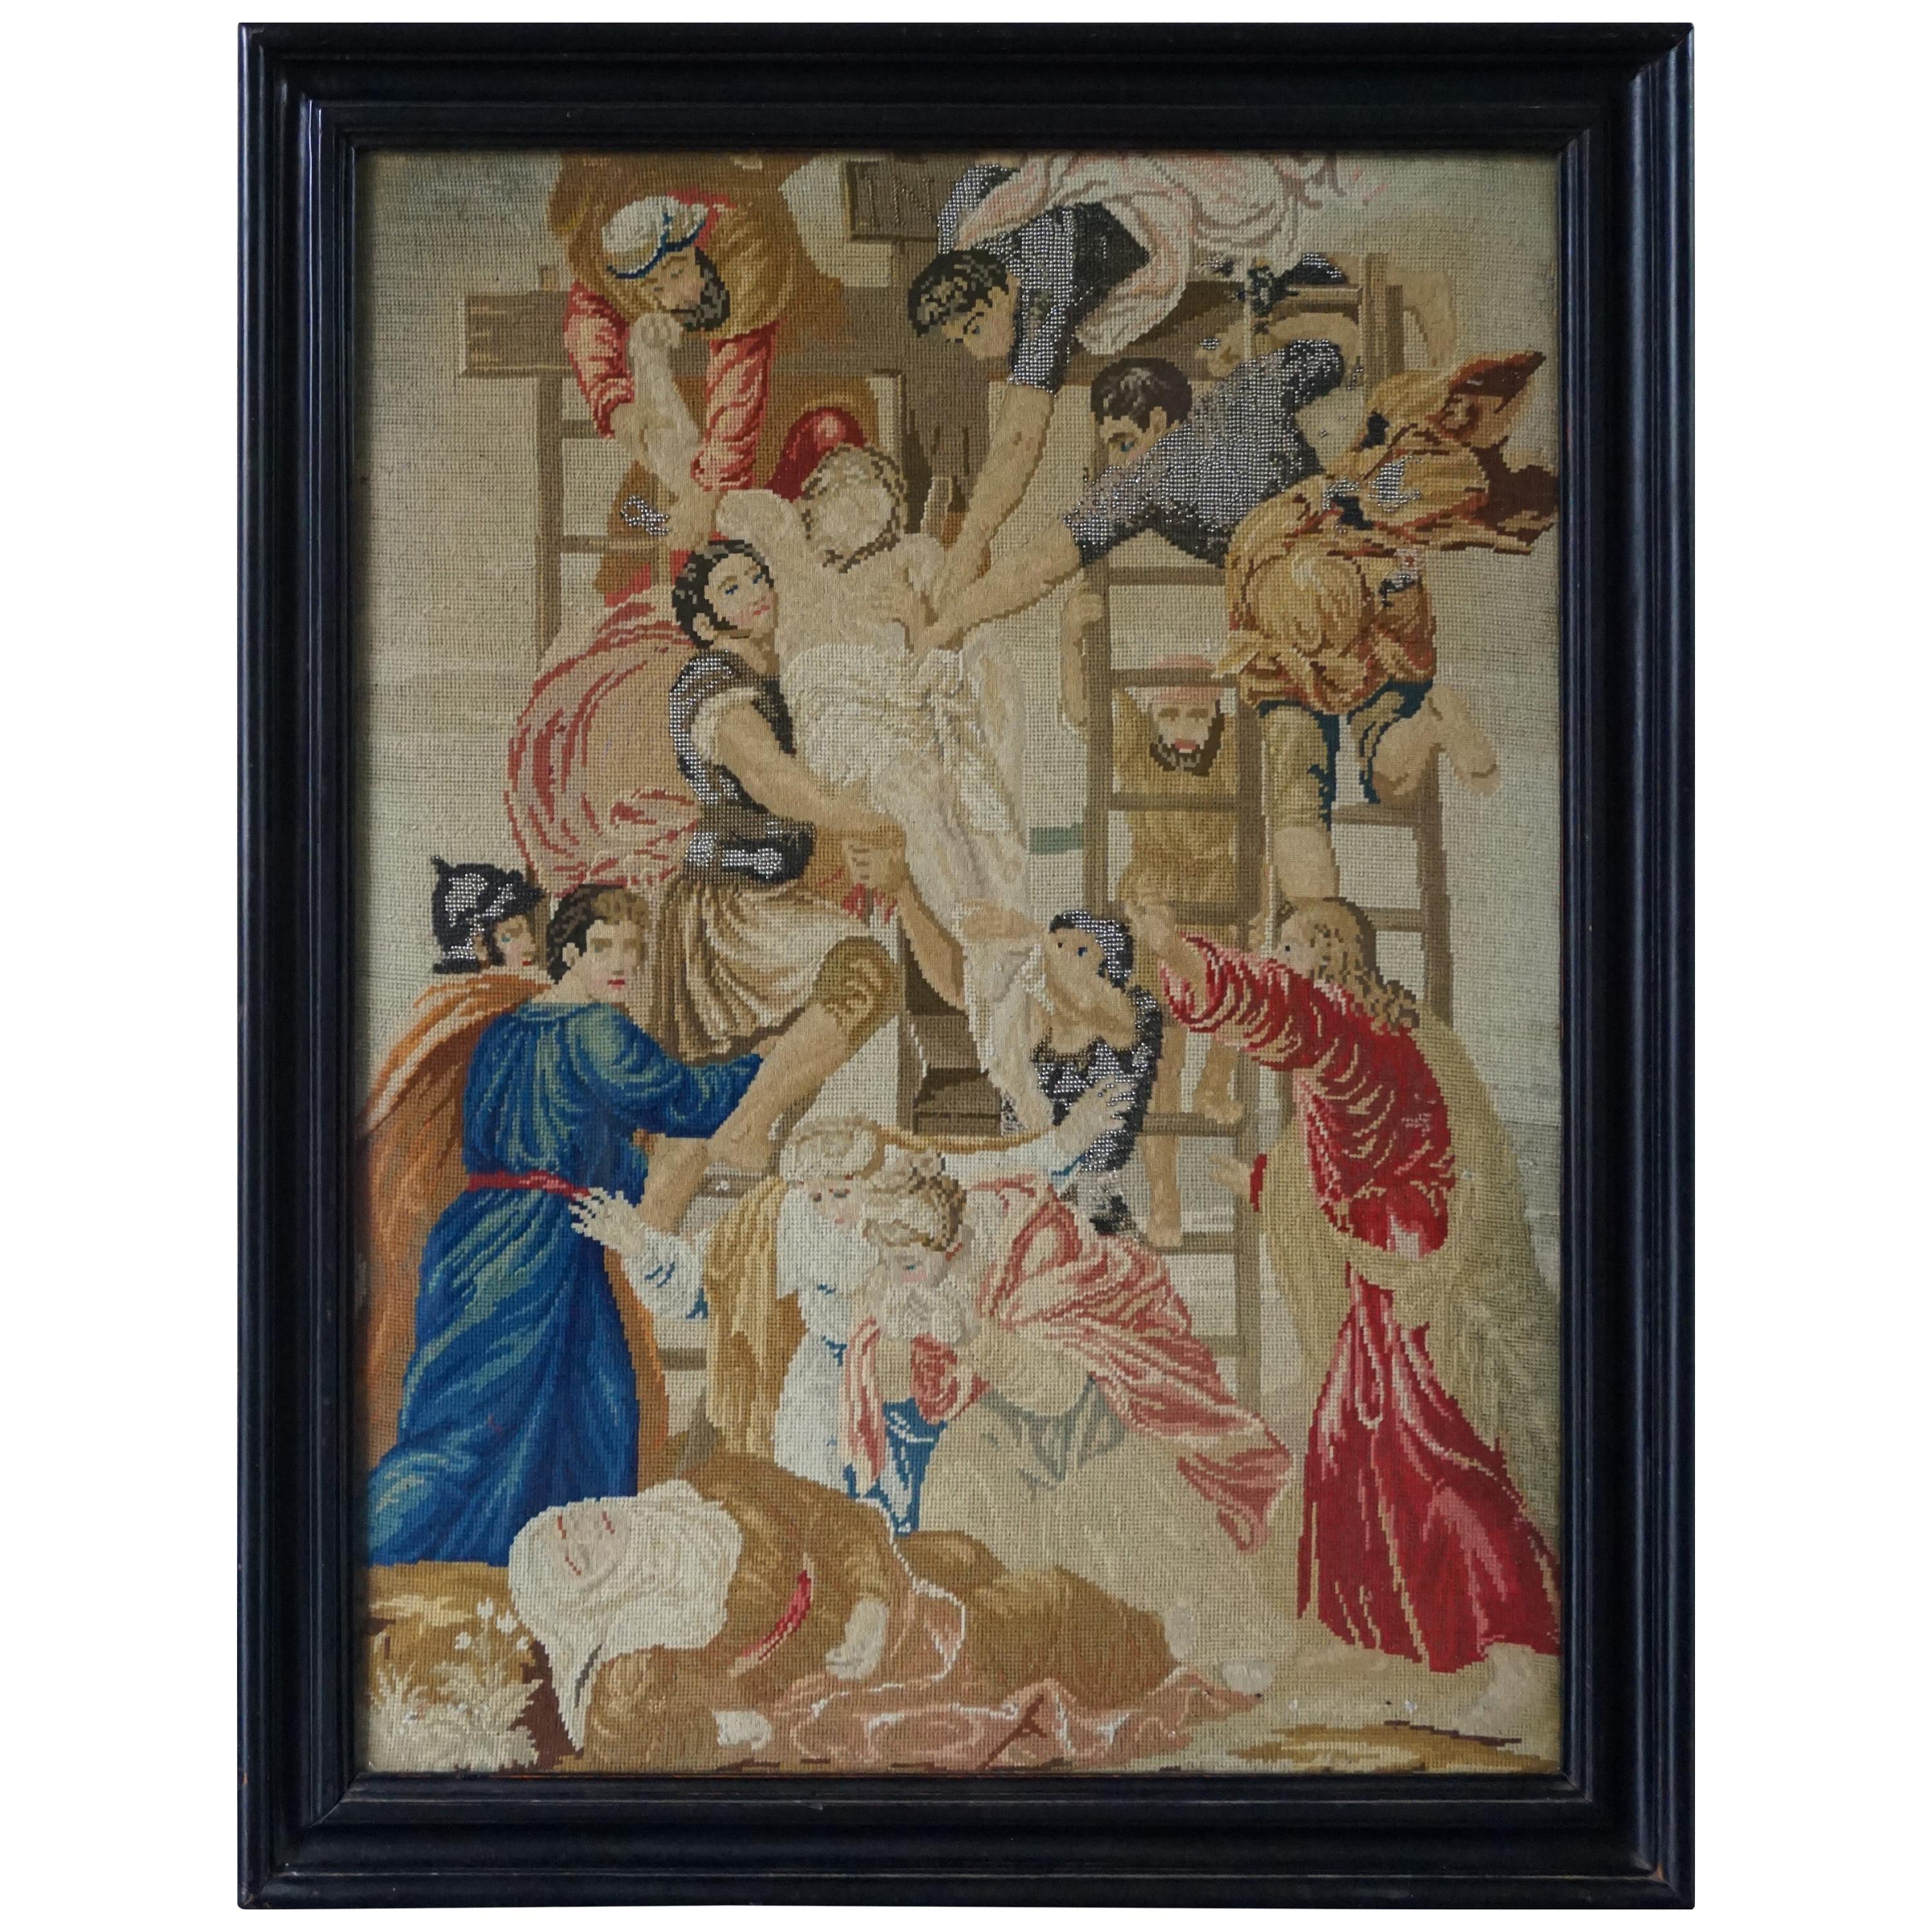 Stunning Mid-1800s Handcrafted Embroidery of Jesus' Descent from the Cross For Sale